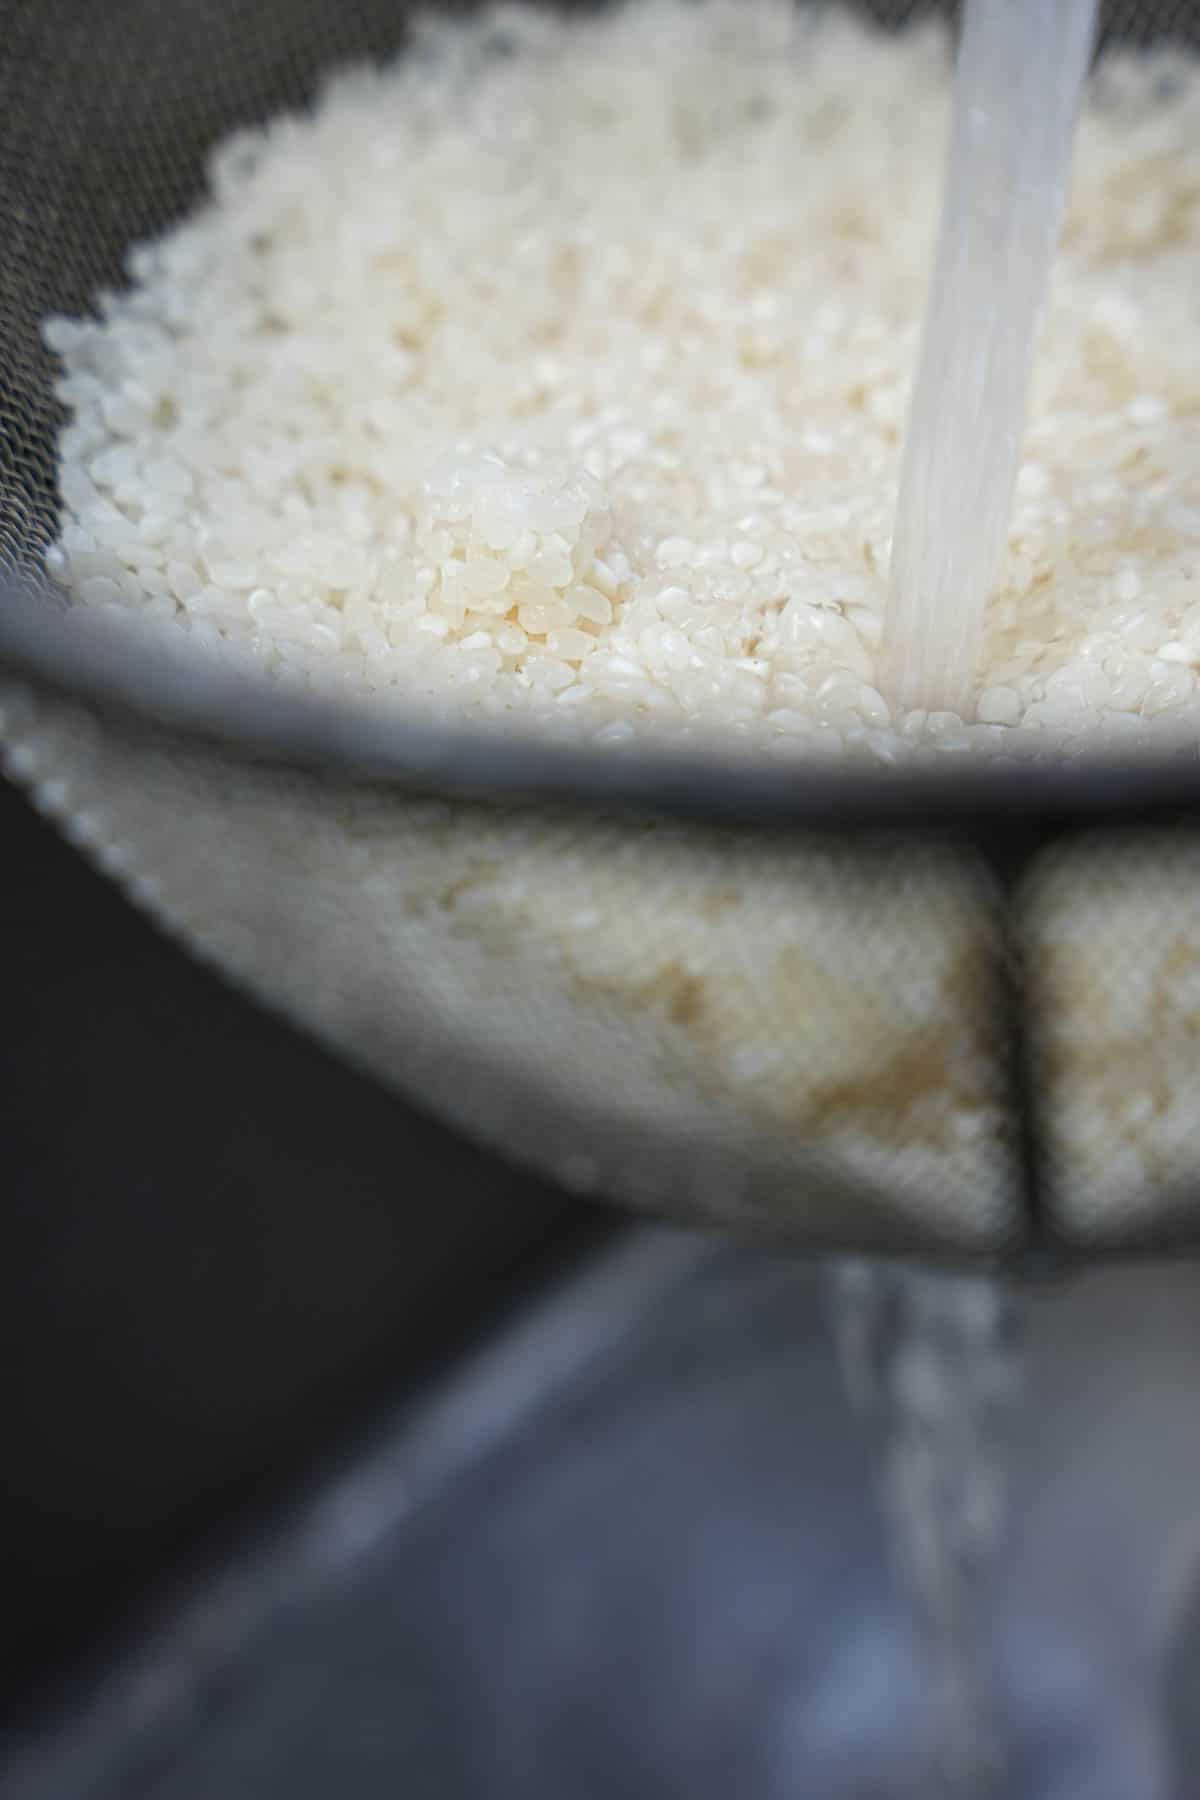 White rice being rinsed in a strainer.